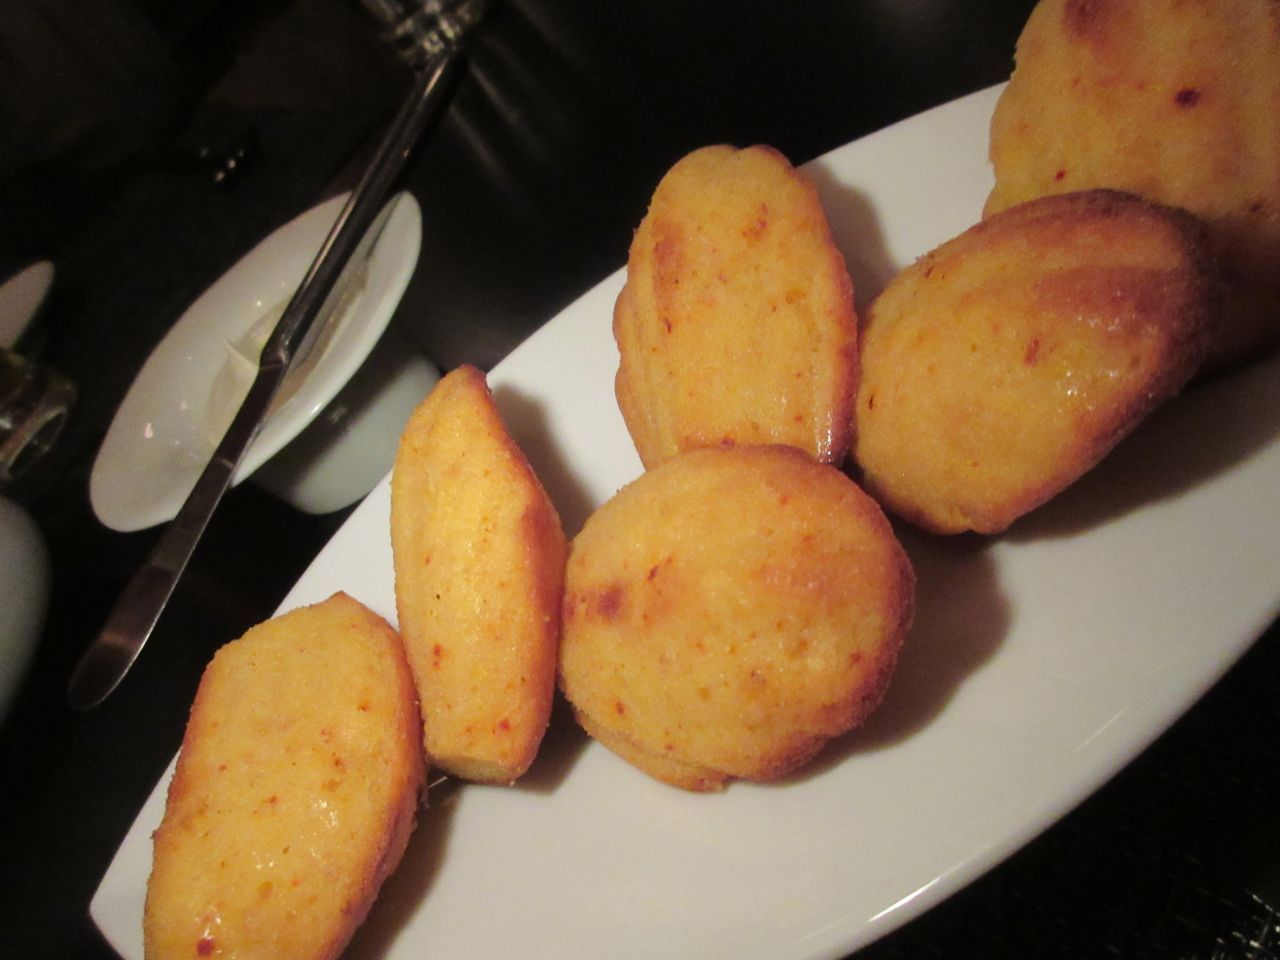 The revolving chef concept at Lettuce Entertain You’s Intro in Chicago provokes corn madeleines.